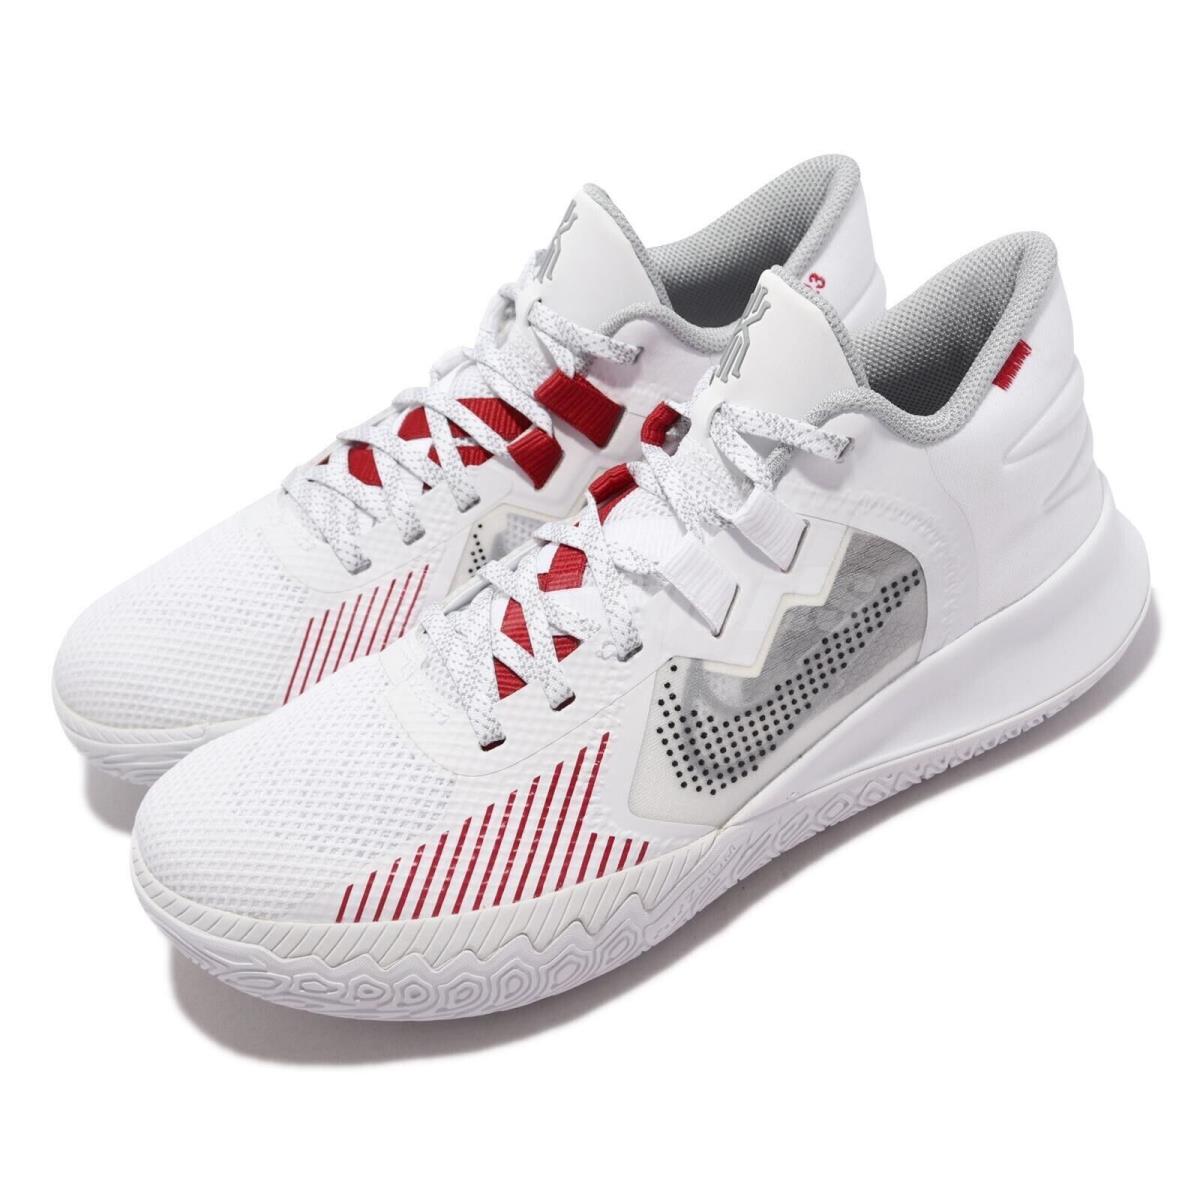 Nike Kyrie Flytrap V 5 White Red Mens Size 9.5 12 13 Basketball Shoes CZ4100-100 - White/ Red, Manufacturer: white/ red